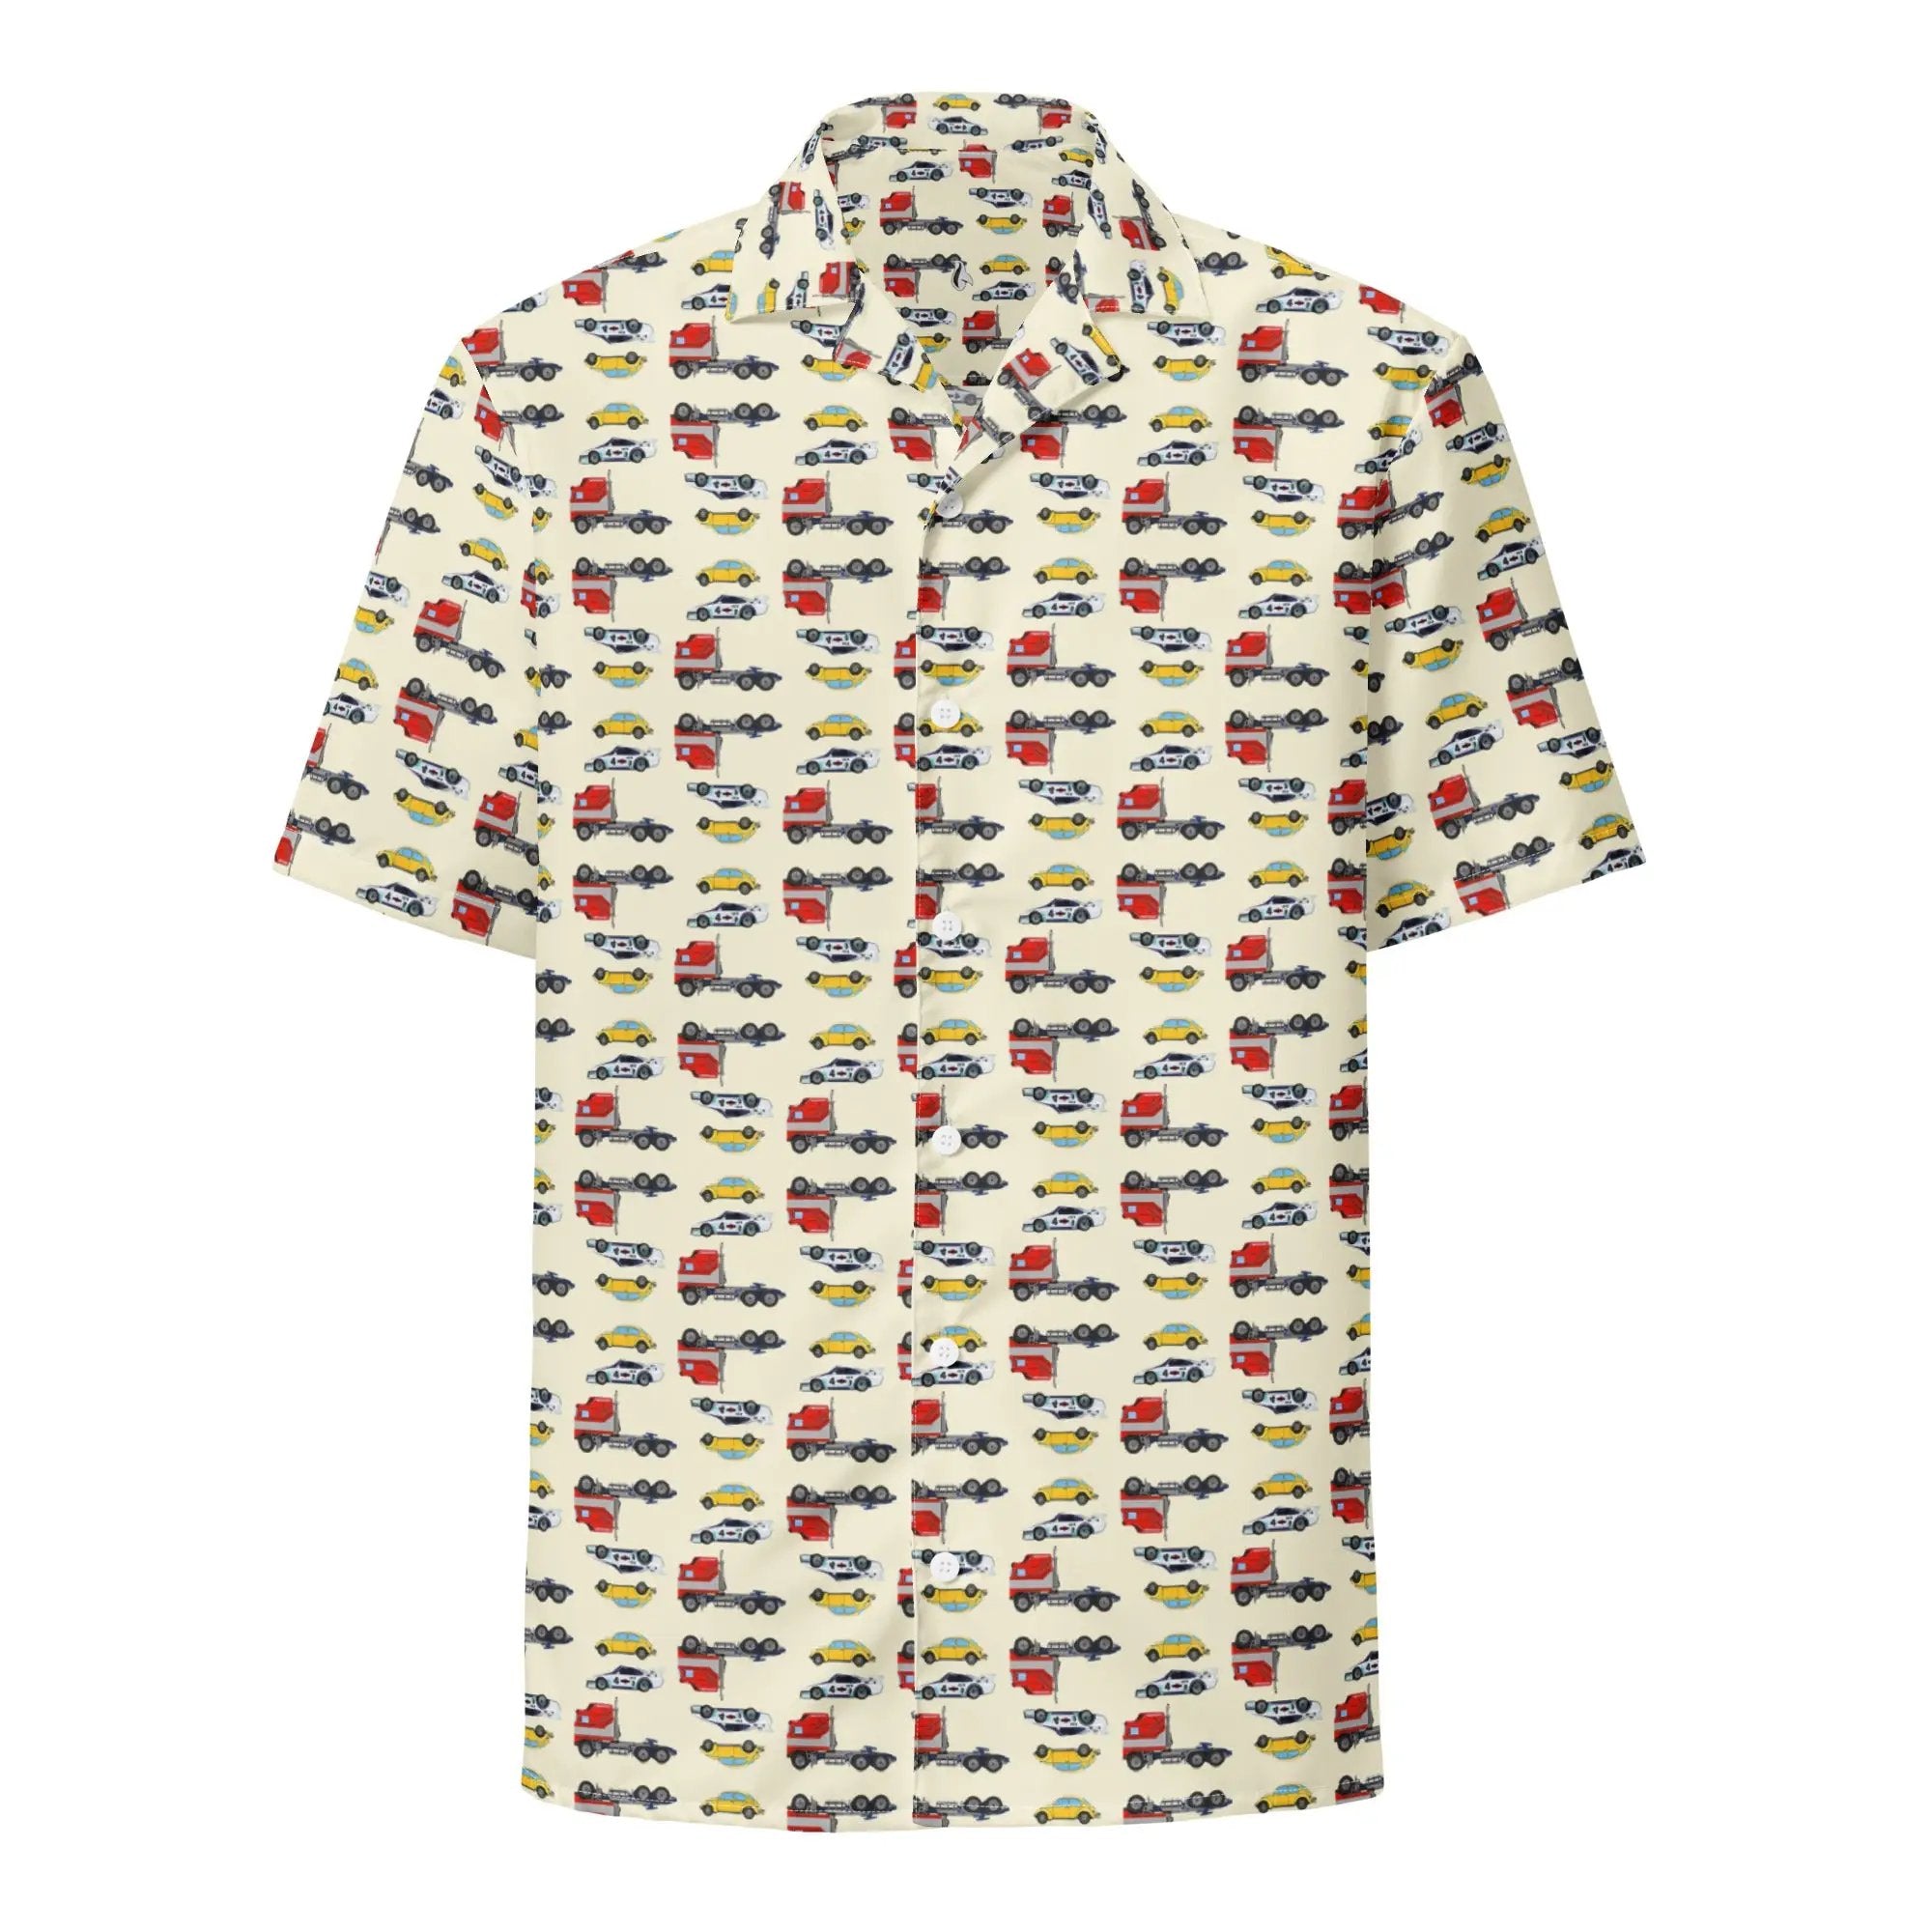 Transformers Roll Out! Button Up Shirt